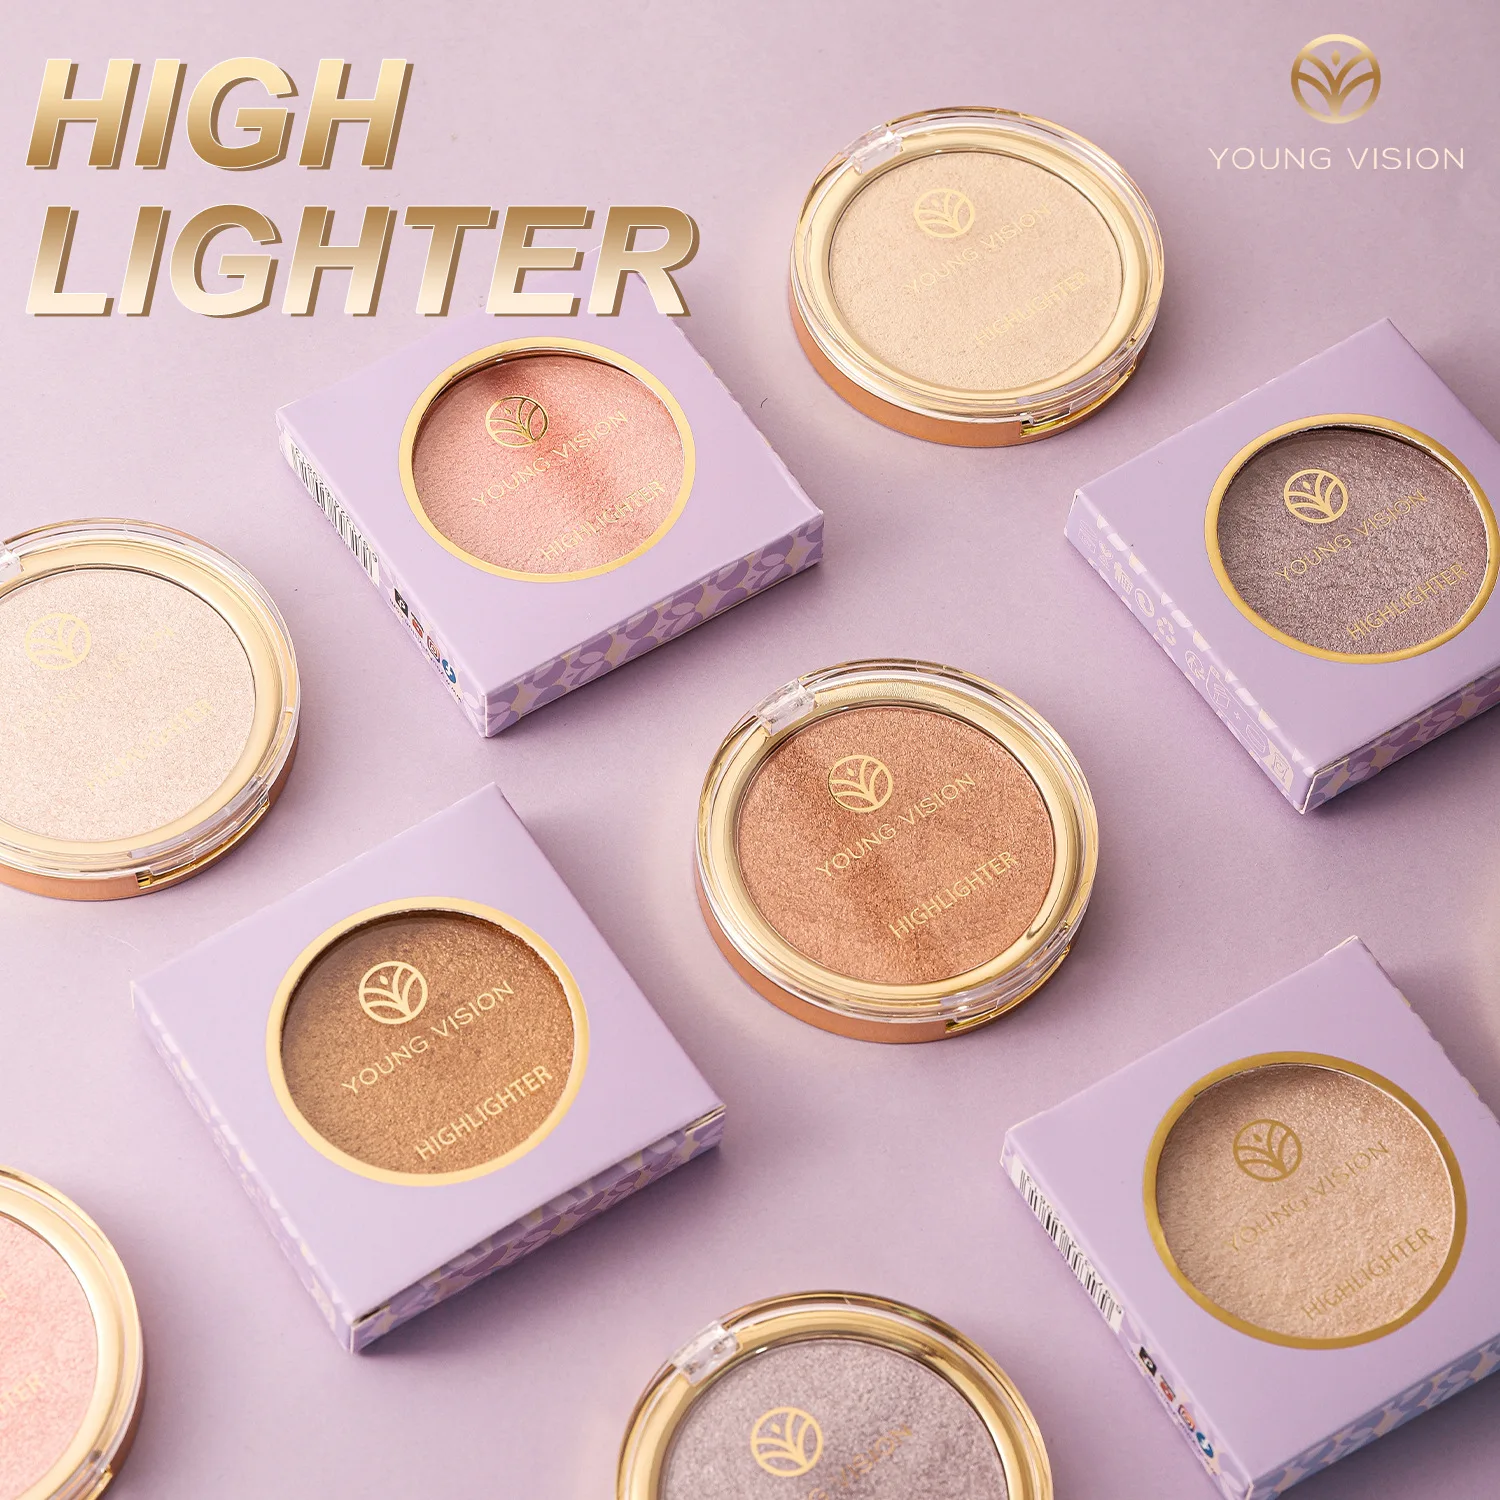 

YOUNG VISION Highlighter Powder Brighten Skin Tone Glitter Glitter Nose Shadow Modification Stereo Highlighter Powder Palette